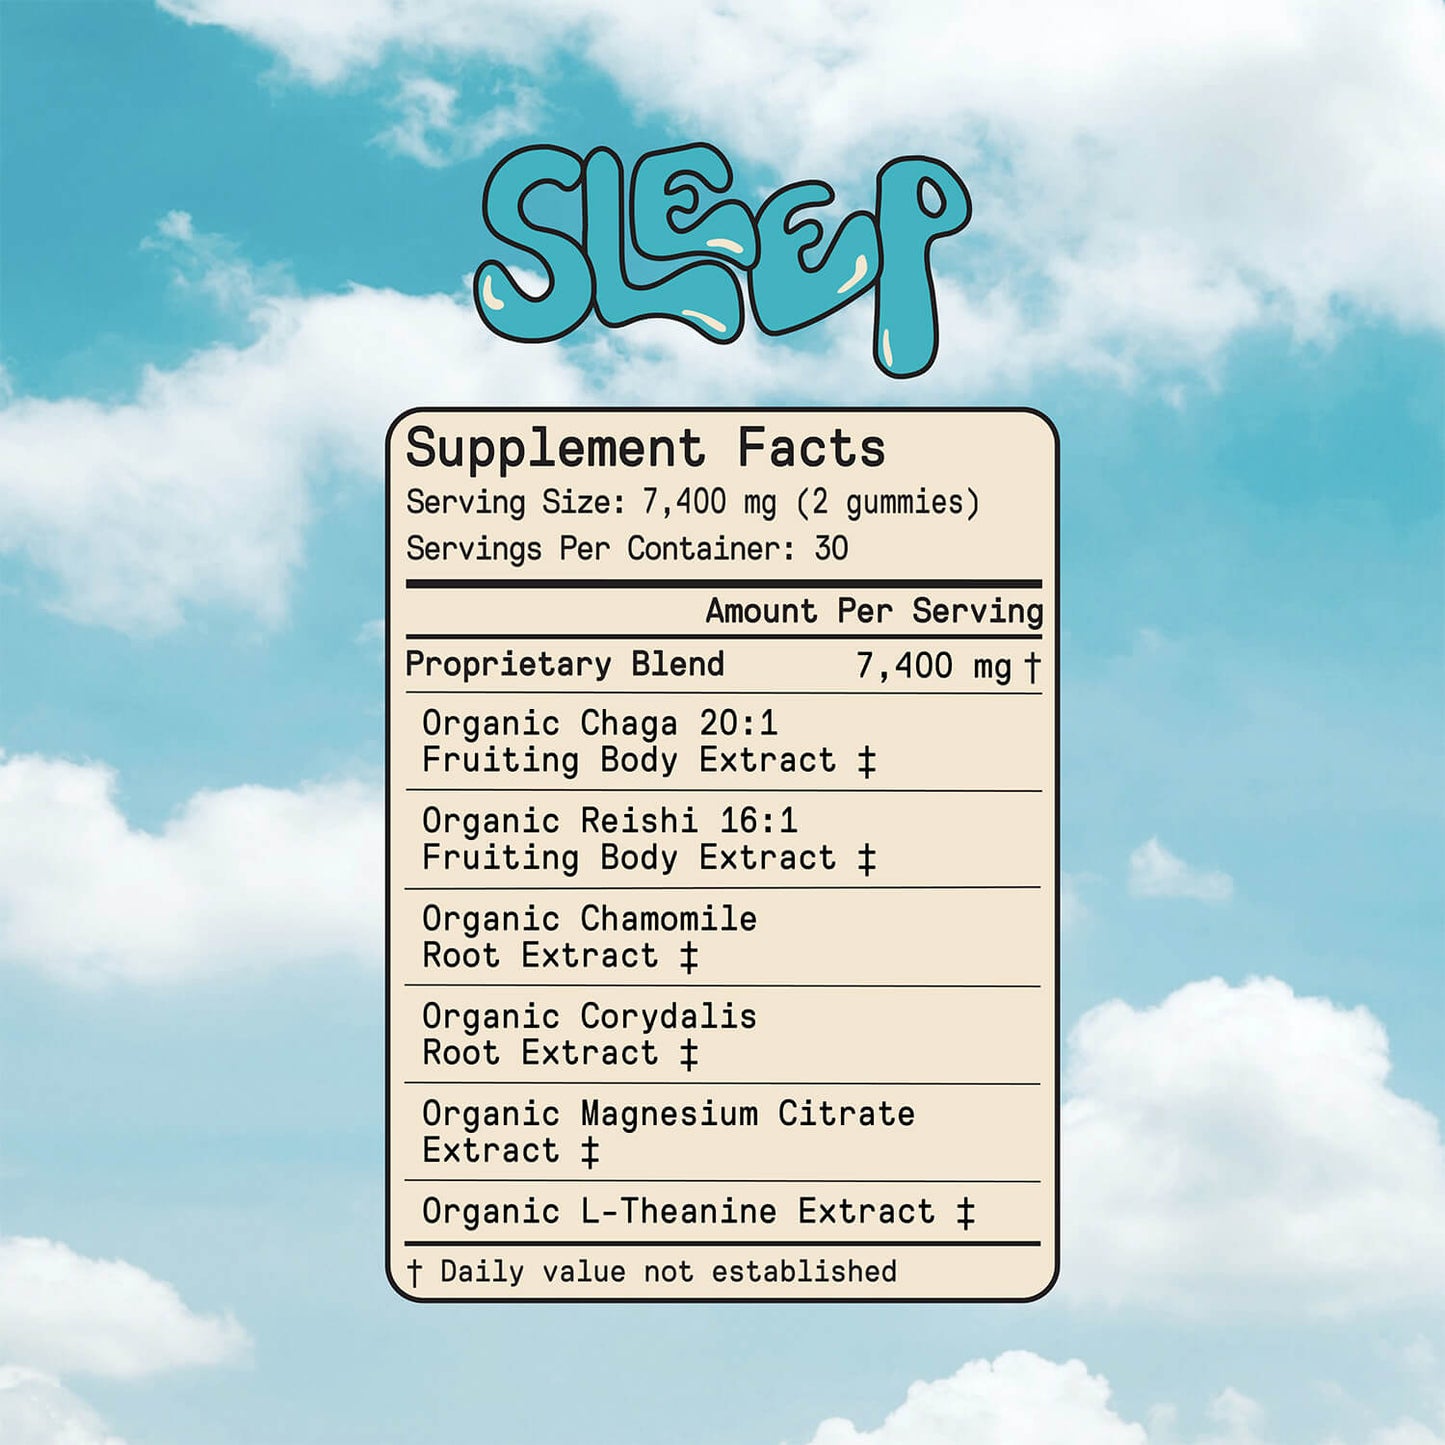 Daily Sleep Gummies by SuperMush, For a Restorative Sleep, Sugar-Free, Soothing Blueberry Blend with a Raspberry Twist